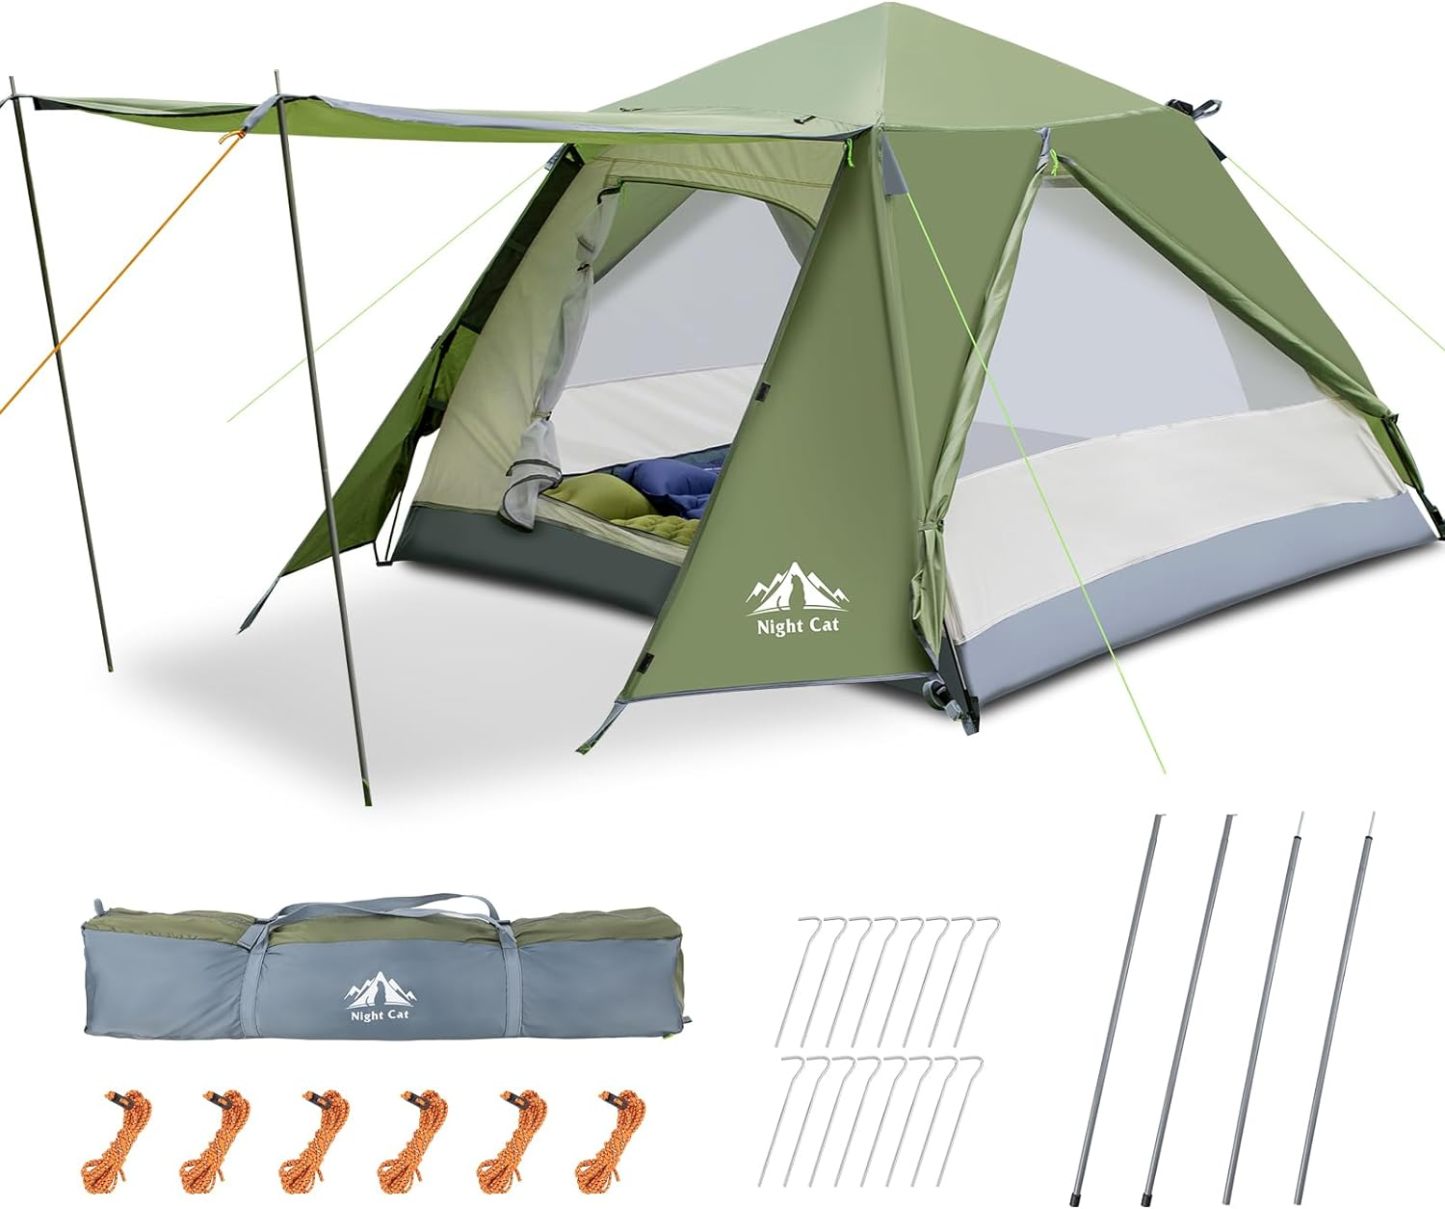 Night Cat Instant Cabin Tent with Rainfly 2-3 Persons Waterproof Pop U